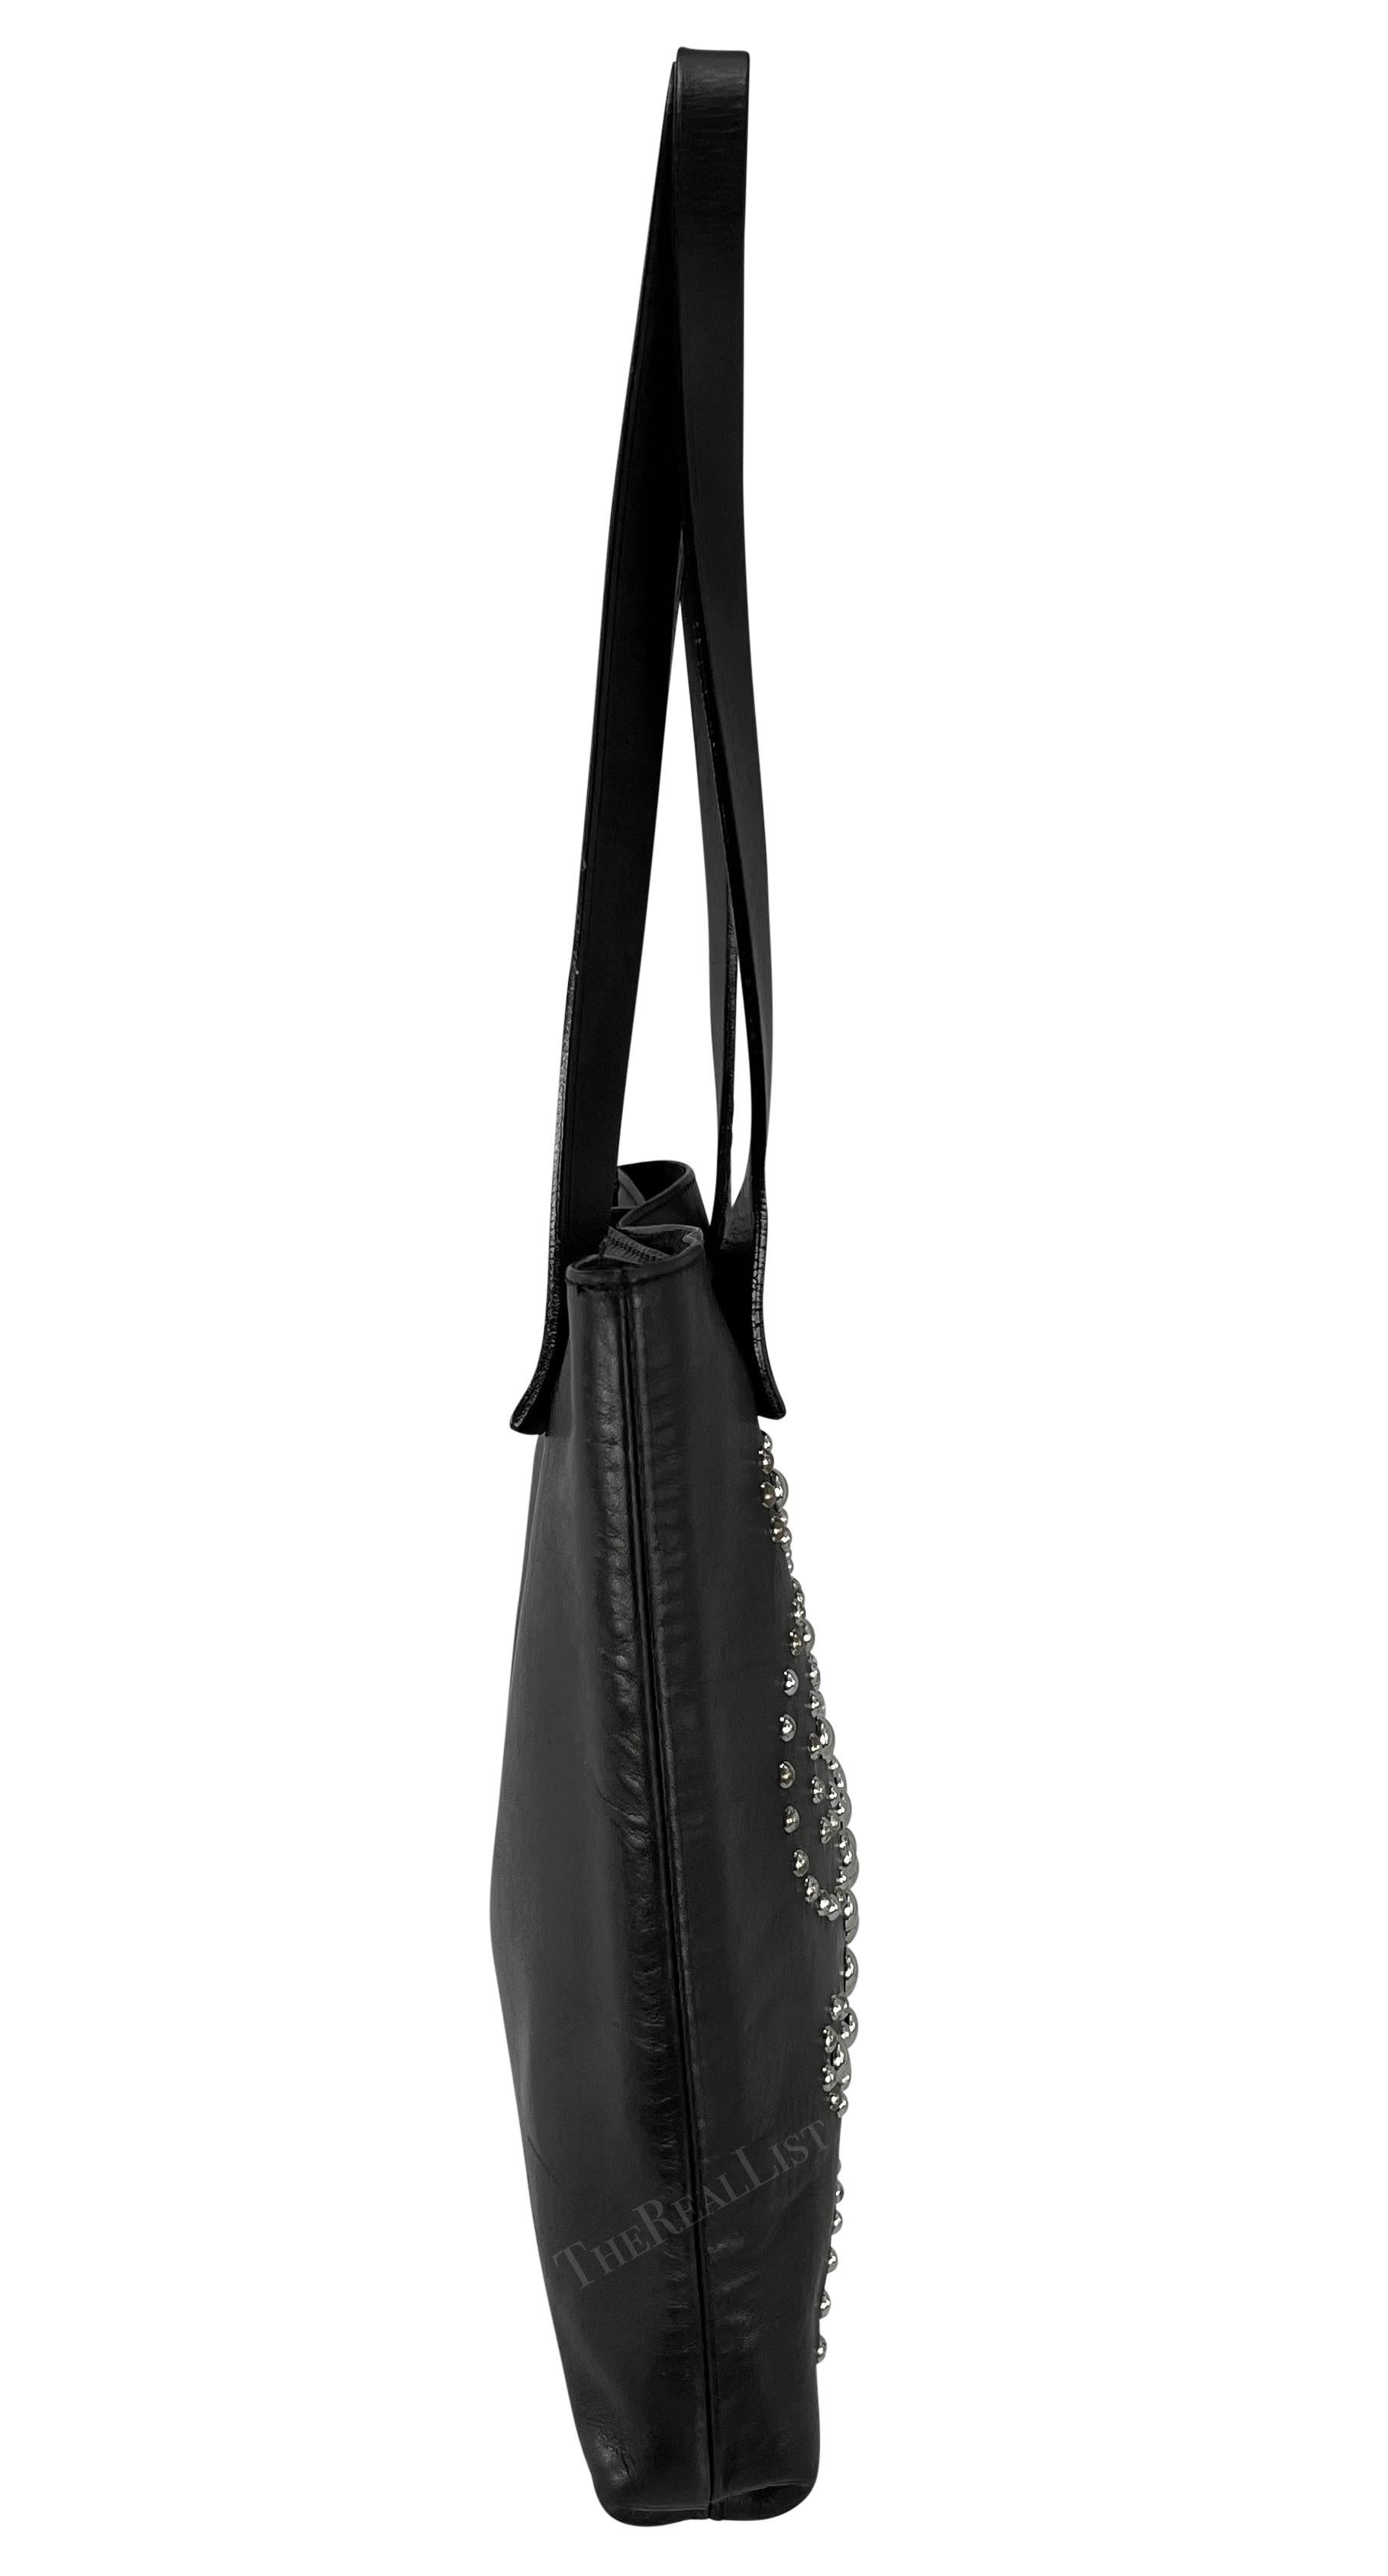 Late 1990s Dolce & Gabbana Black Leather Studded Small Shoulder Tote Bag For Sale 3